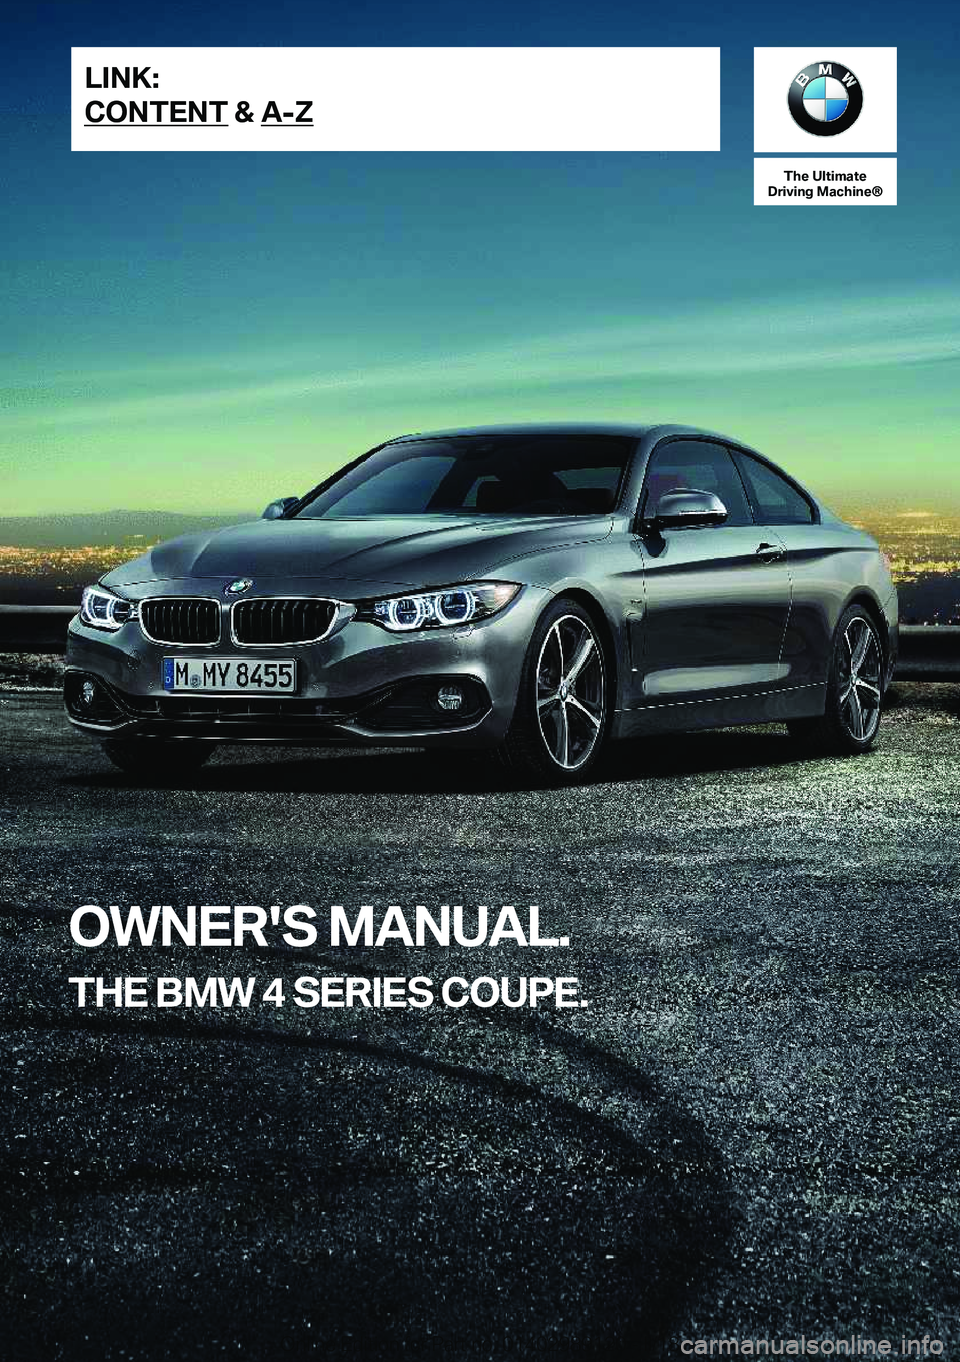 BMW 4 SERIES COUPE 2019  Owners Manual �T�h�e��U�l�t�i�m�a�t�e
�D�r�i�v�i�n�g��M�a�c�h�i�n�e�n
�O�W�N�E�R�'�S��M�A�N�U�A�L�.
�T�H�E��B�M�W��4��S�E�R�I�E�S��C�O�U�P�E�.�L�I�N�K�:
�C�O�N�T�E�N�T��&��A�-�Z�O�n�l�i�n�e� �E�d�i�t�i